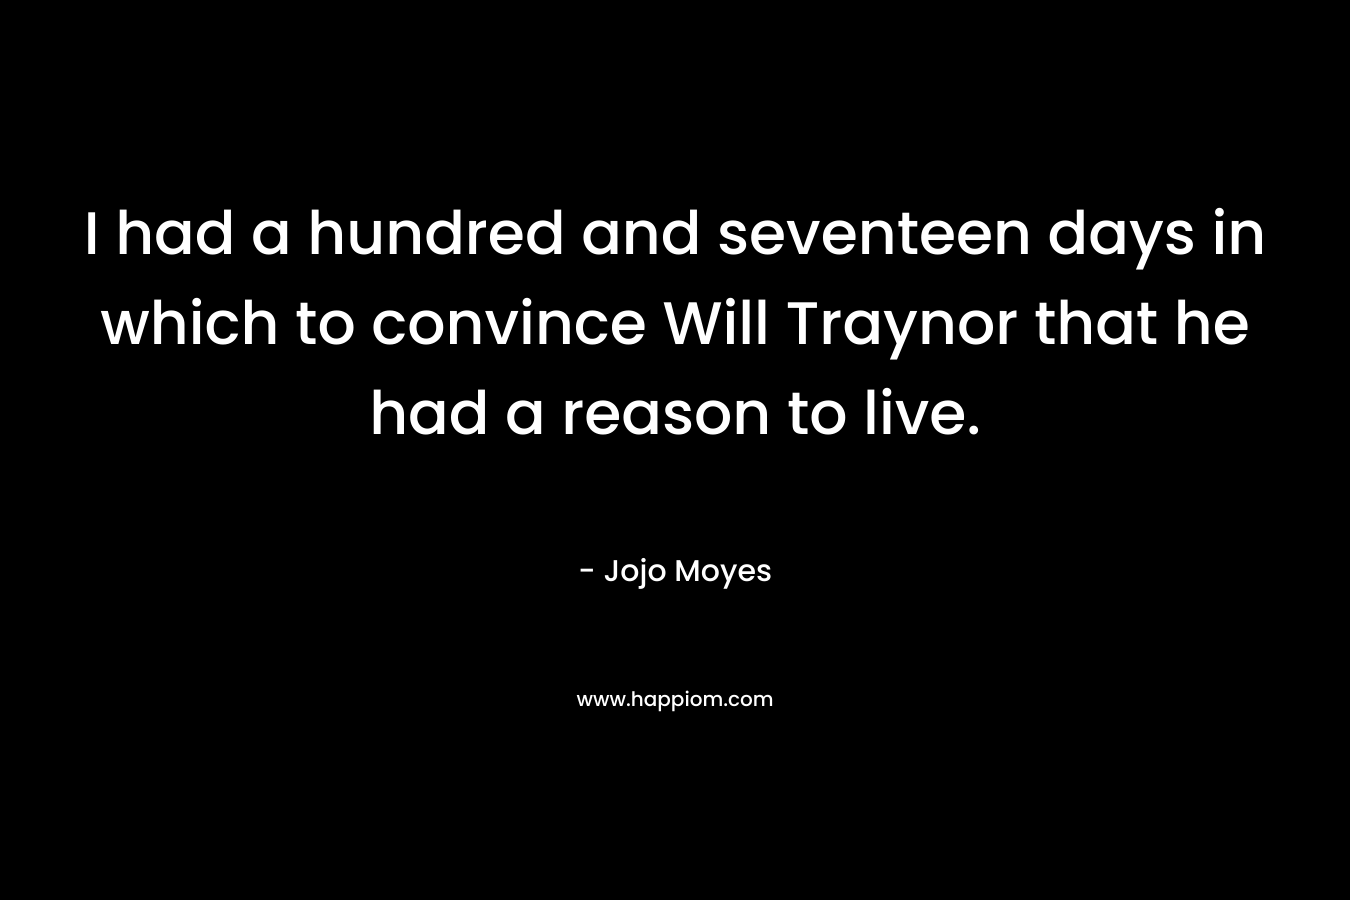 I had a hundred and seventeen days in which to convince Will Traynor that he had a reason to live.